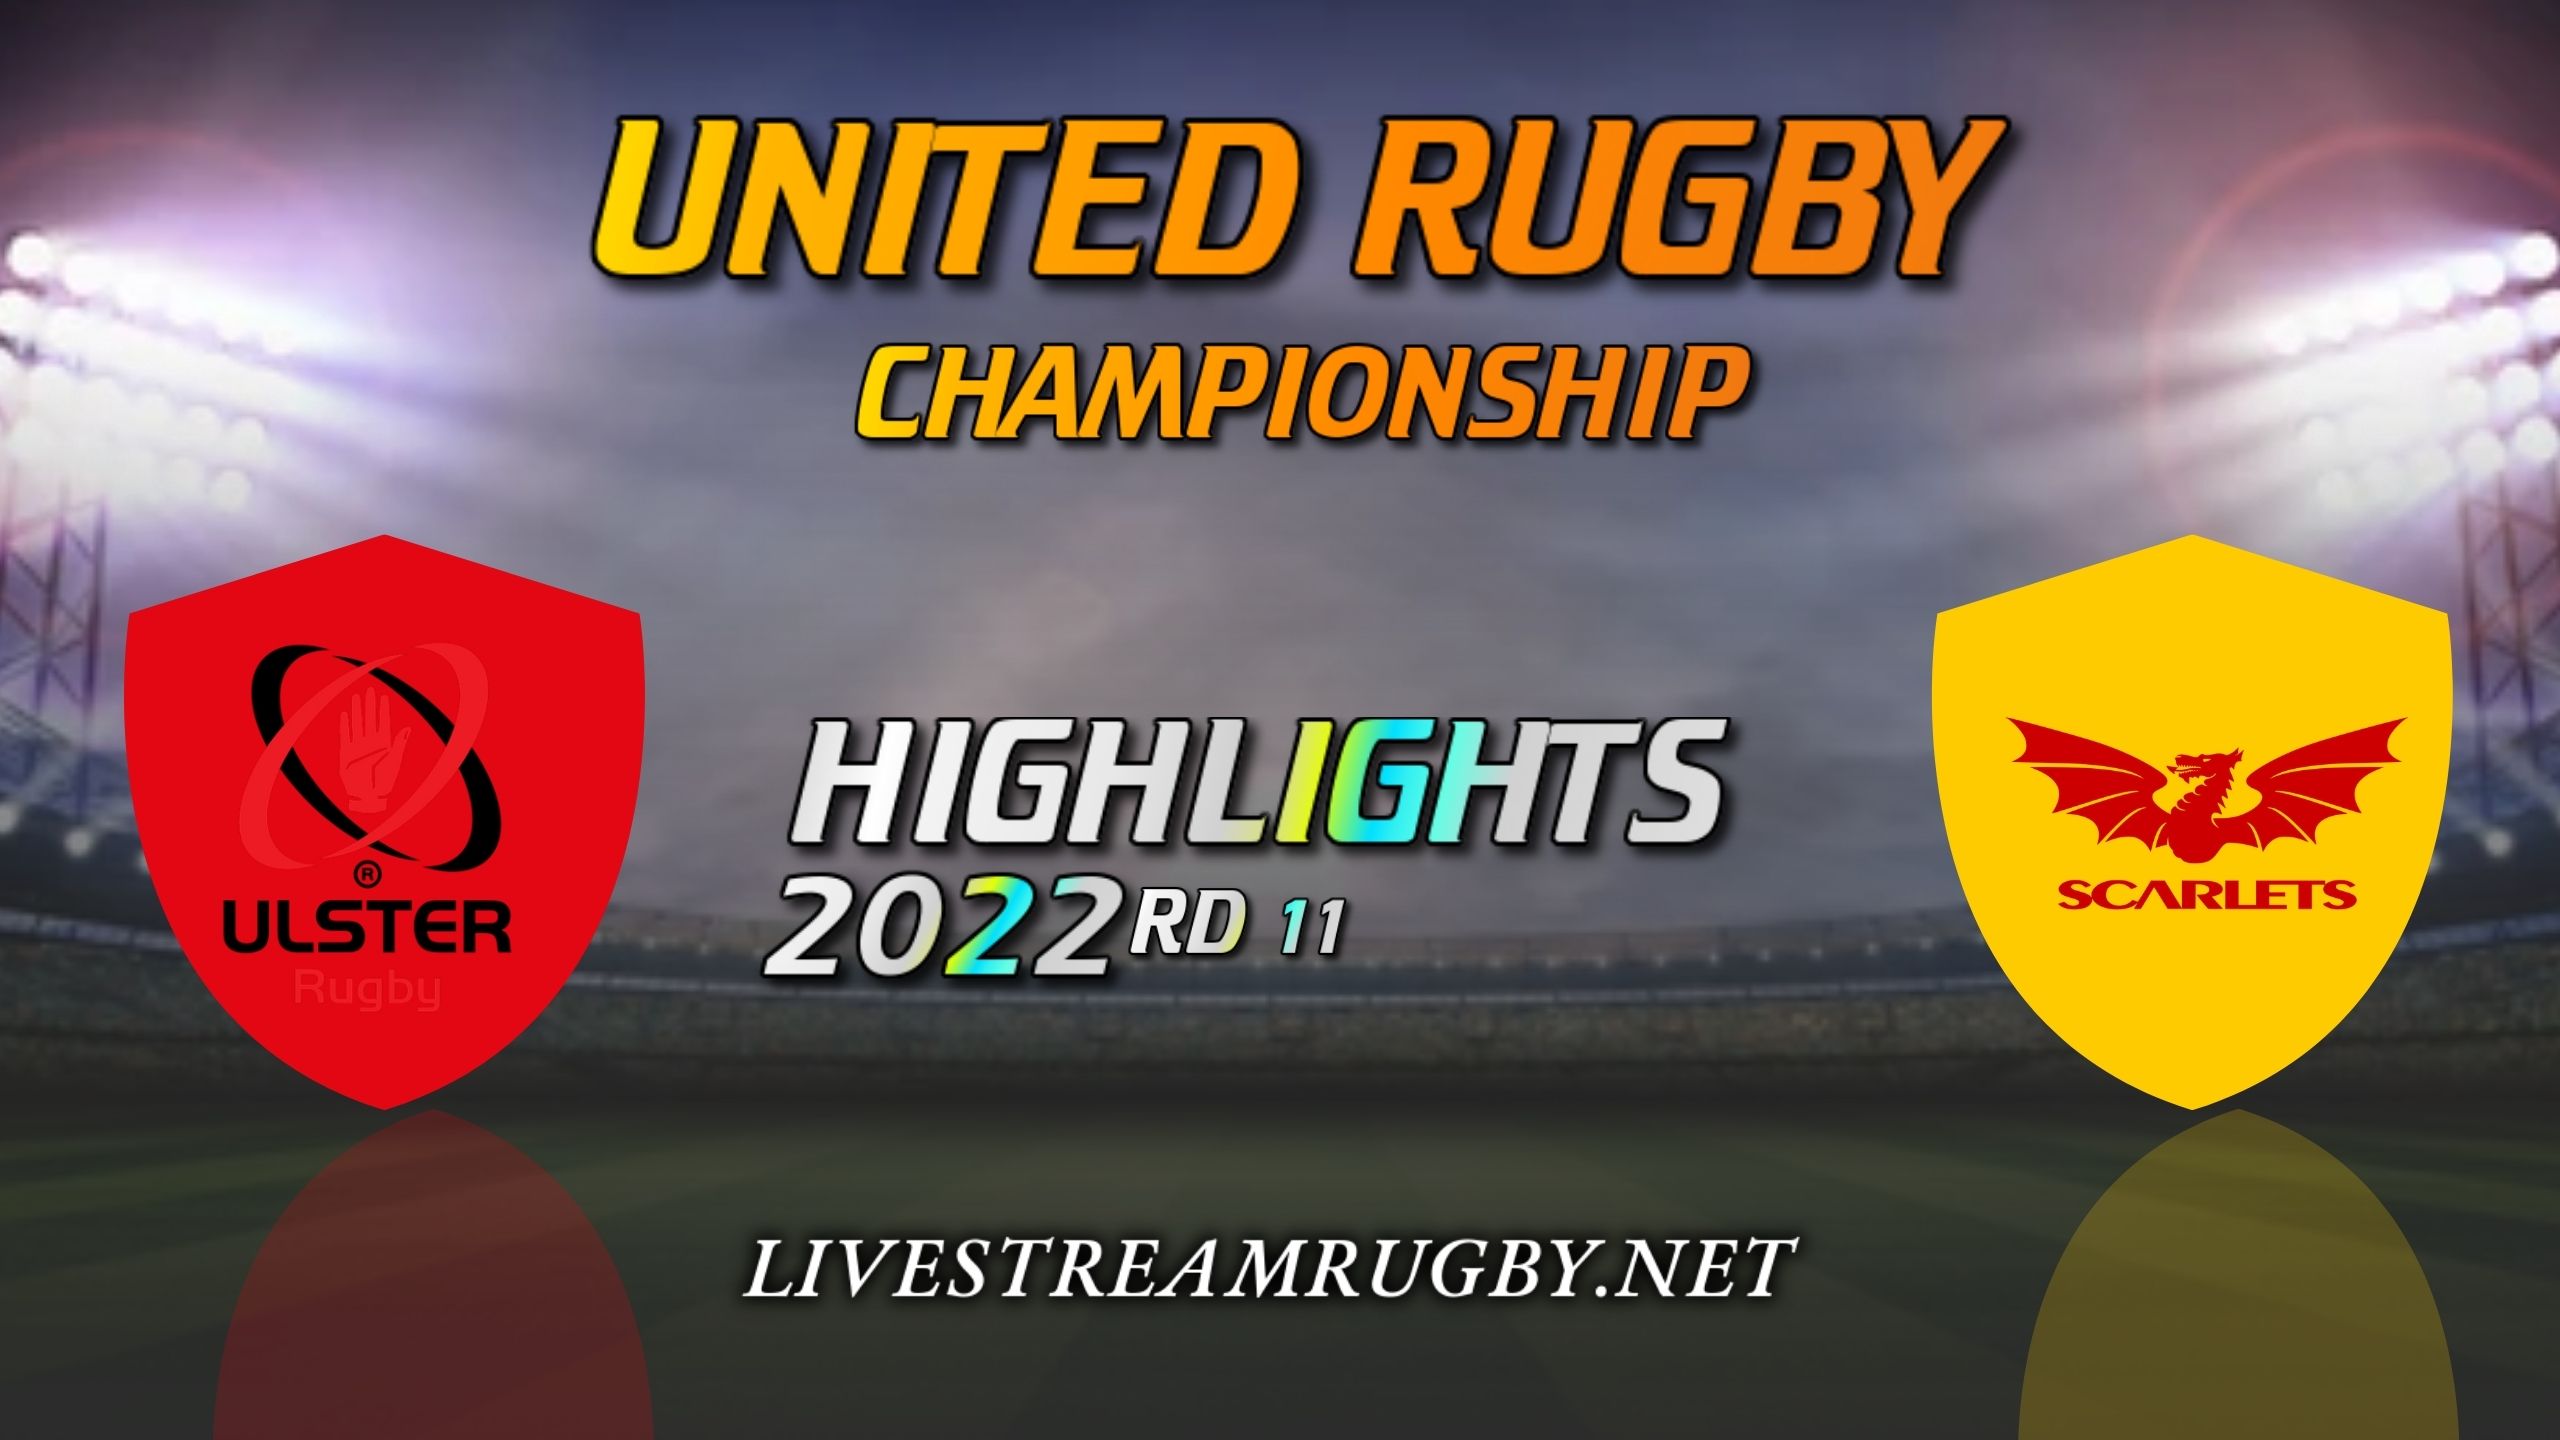 Ulster Vs Scarlets Highlights 2022 Rd 11 United Rugby